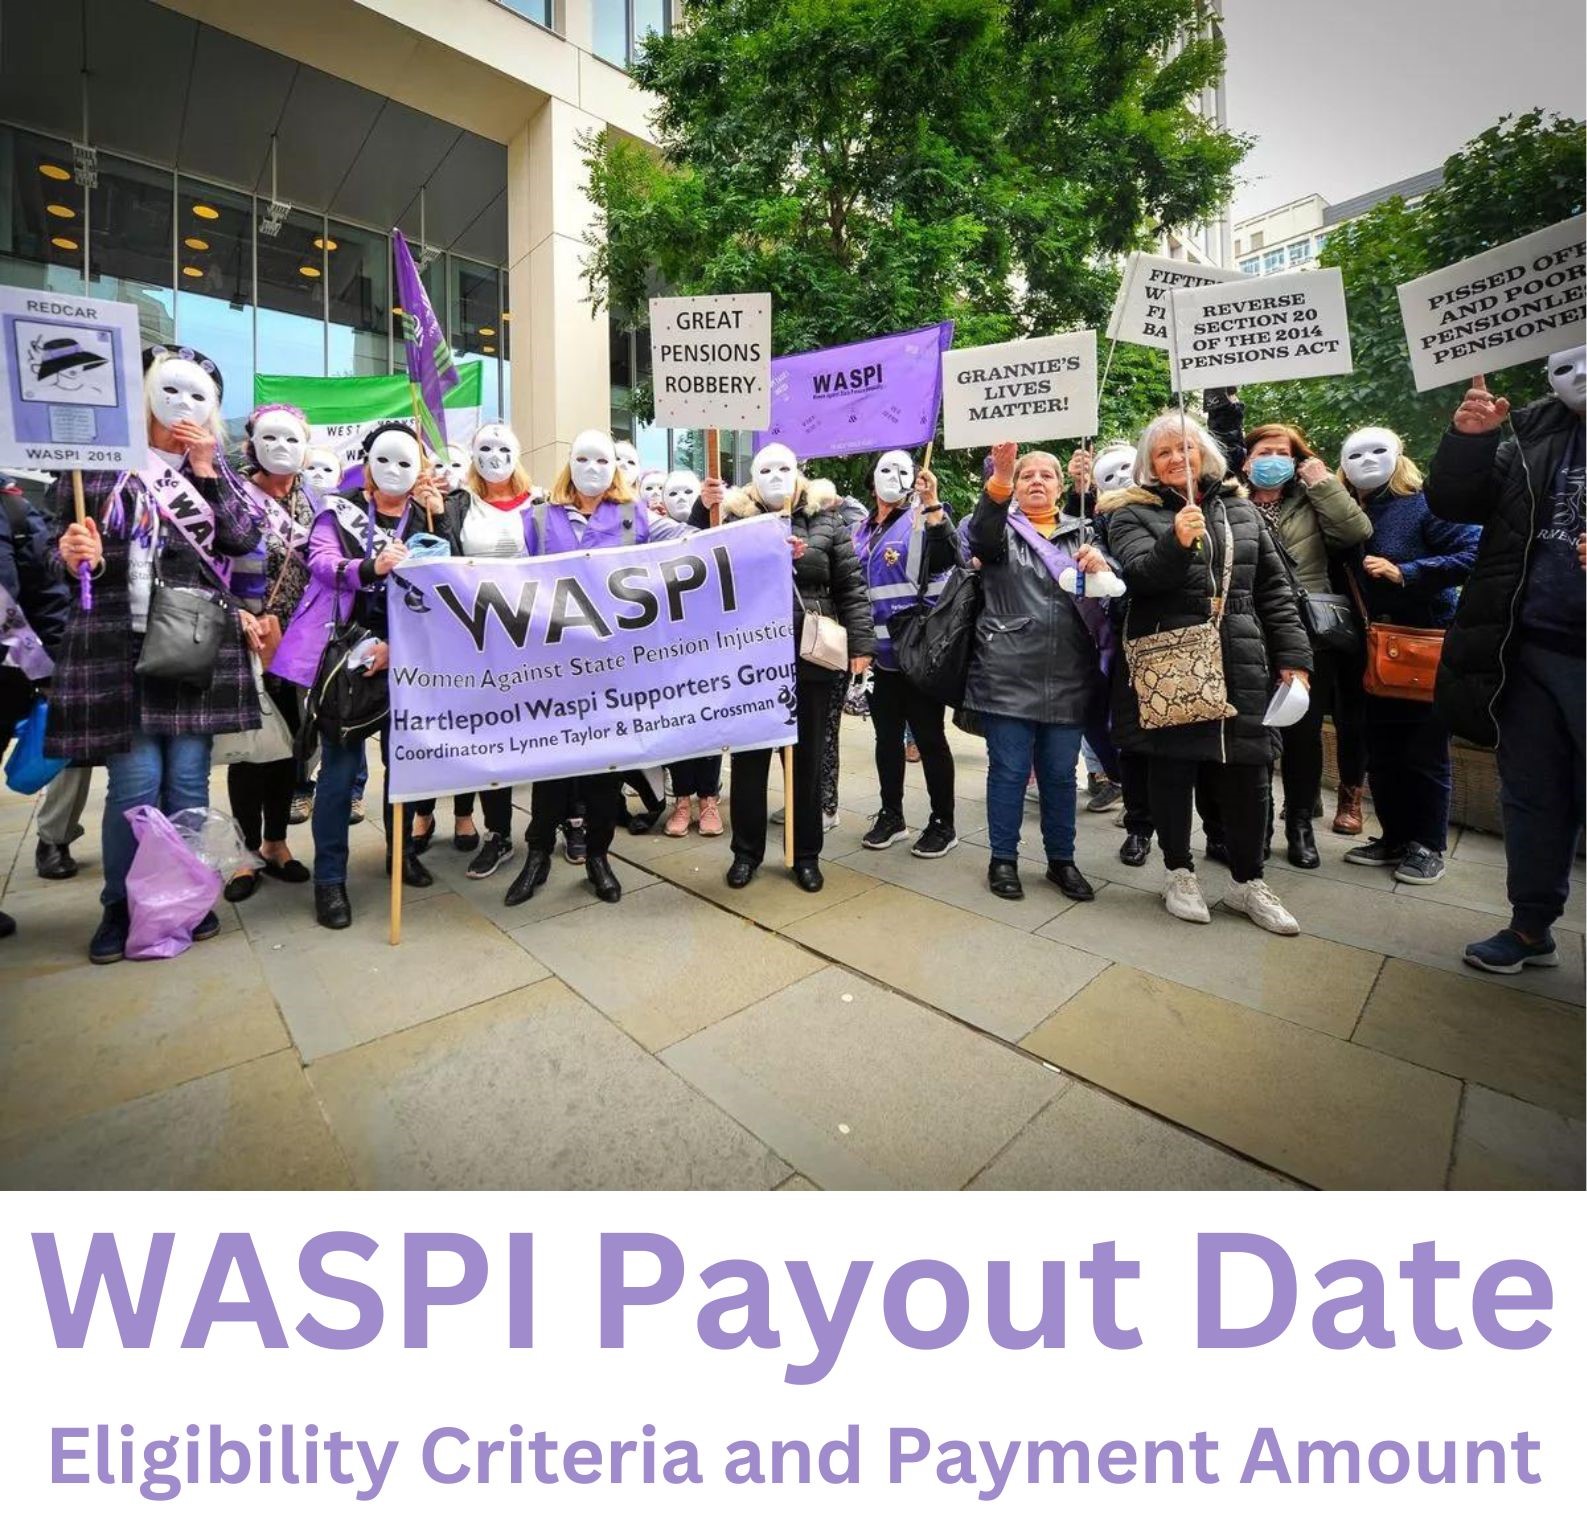 WASPI Payout Date - Eligibility Criteria and Payment Amount